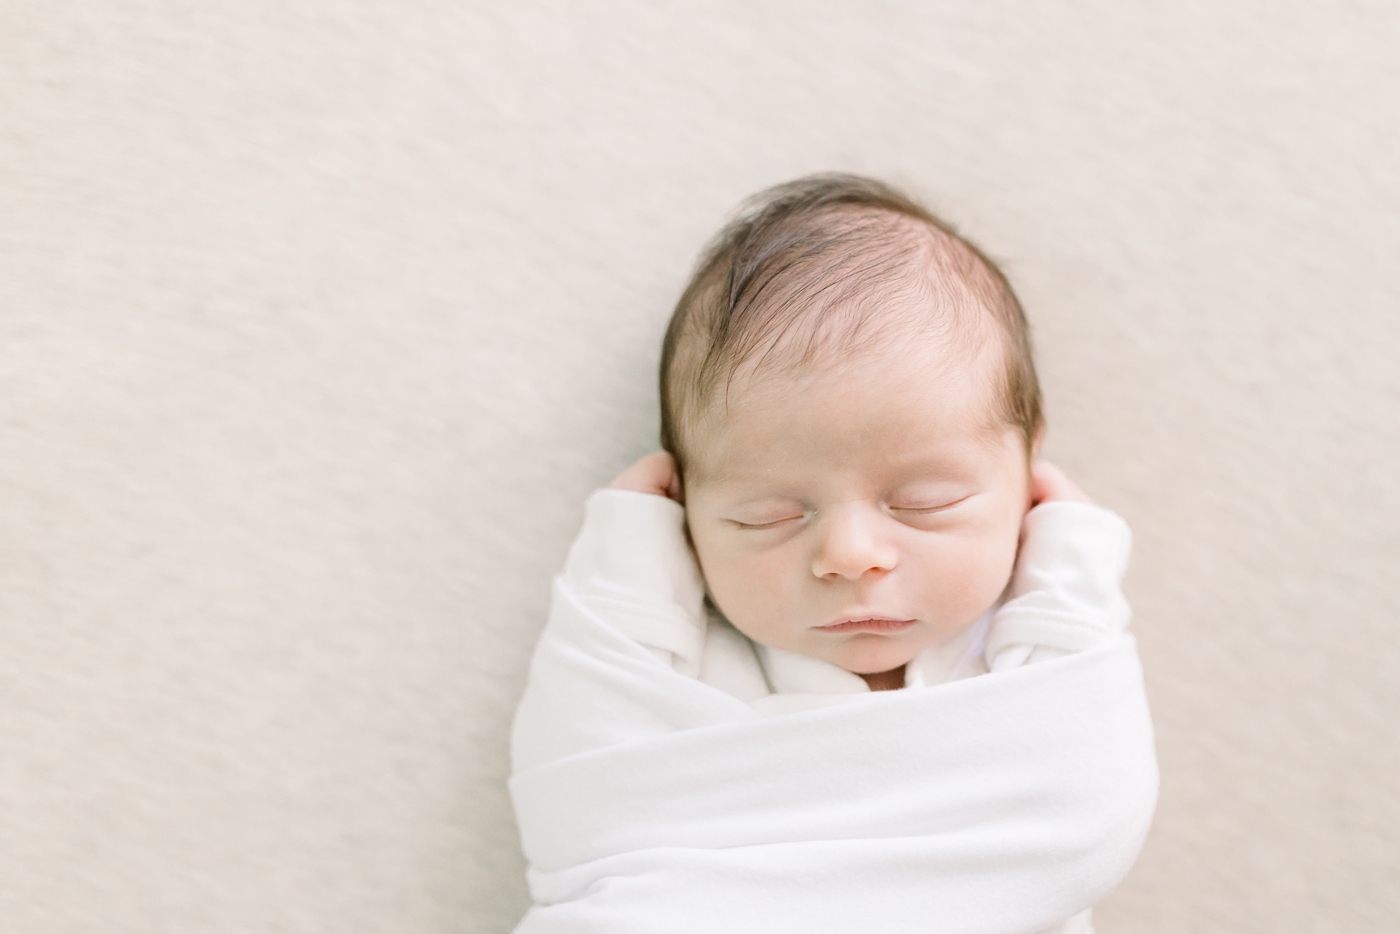 Sleeping newborn baby wrapped in a white swaddle | Photo by Caitlyn Motycka Photography.